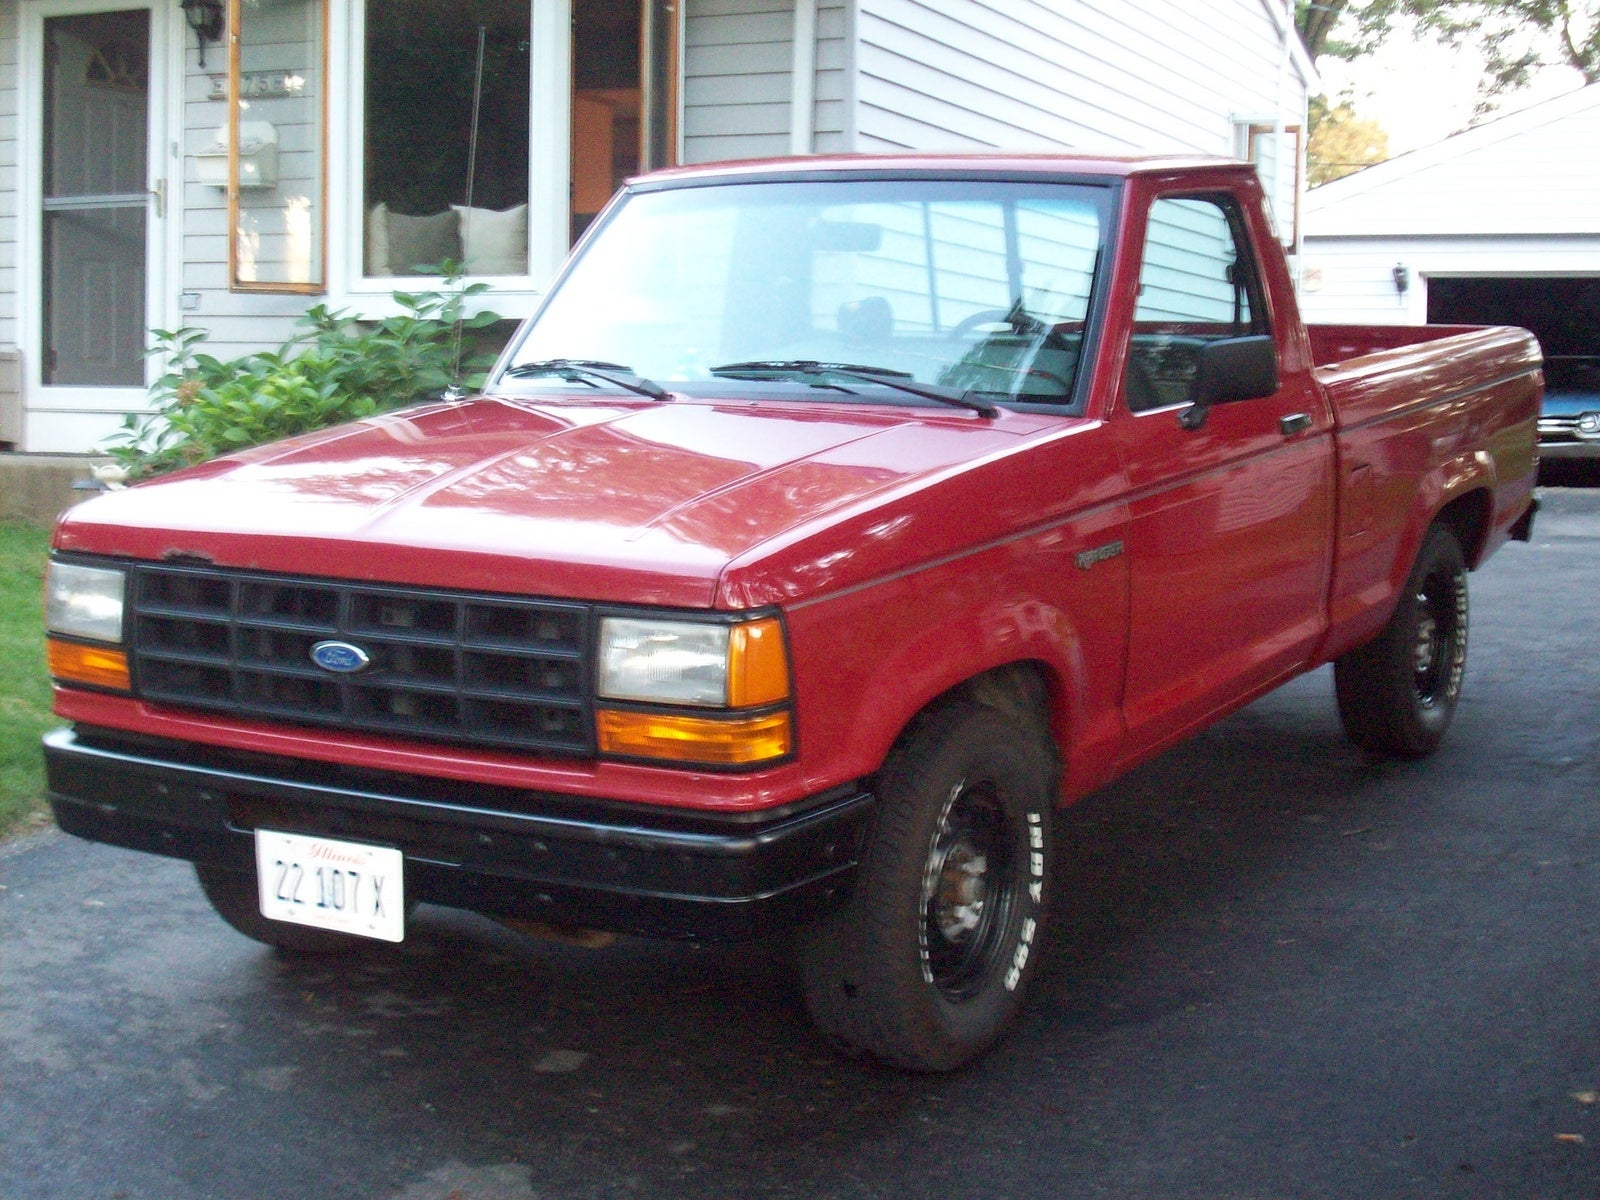 1989 Ford ranger owners manual pdf #5